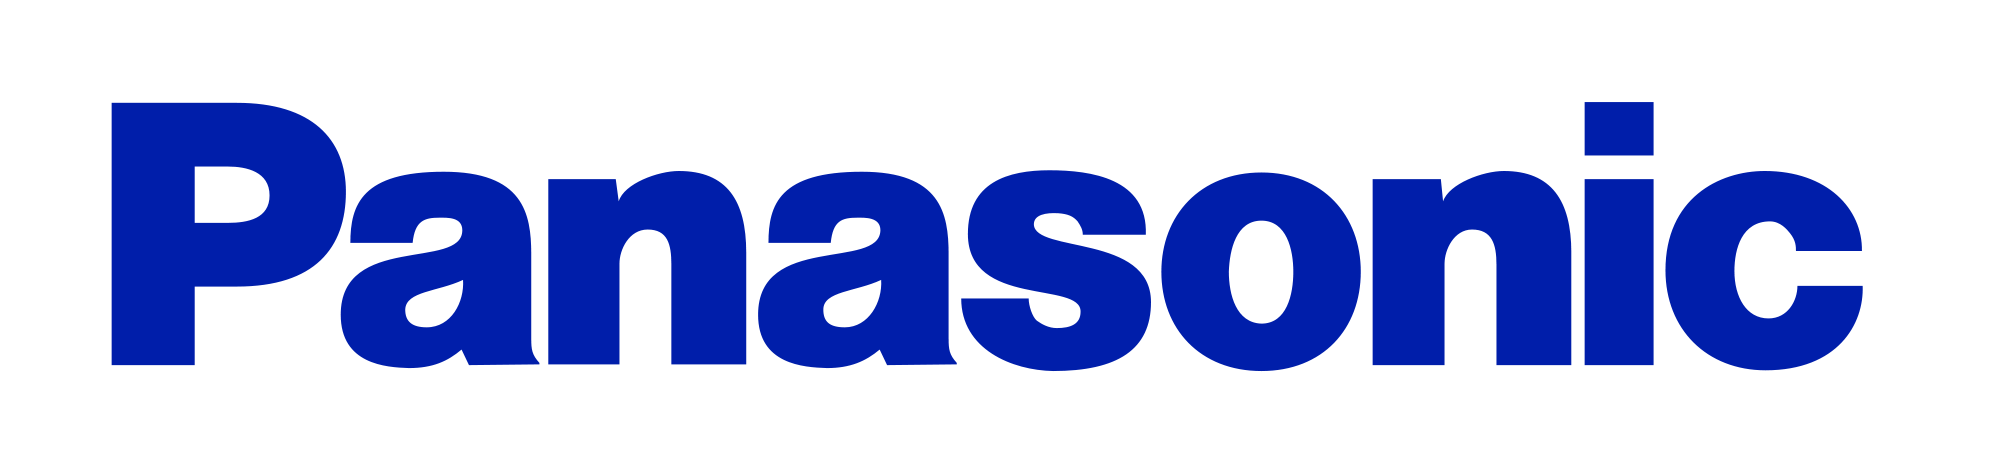 panasonic mobile Customer care Contacts numbers